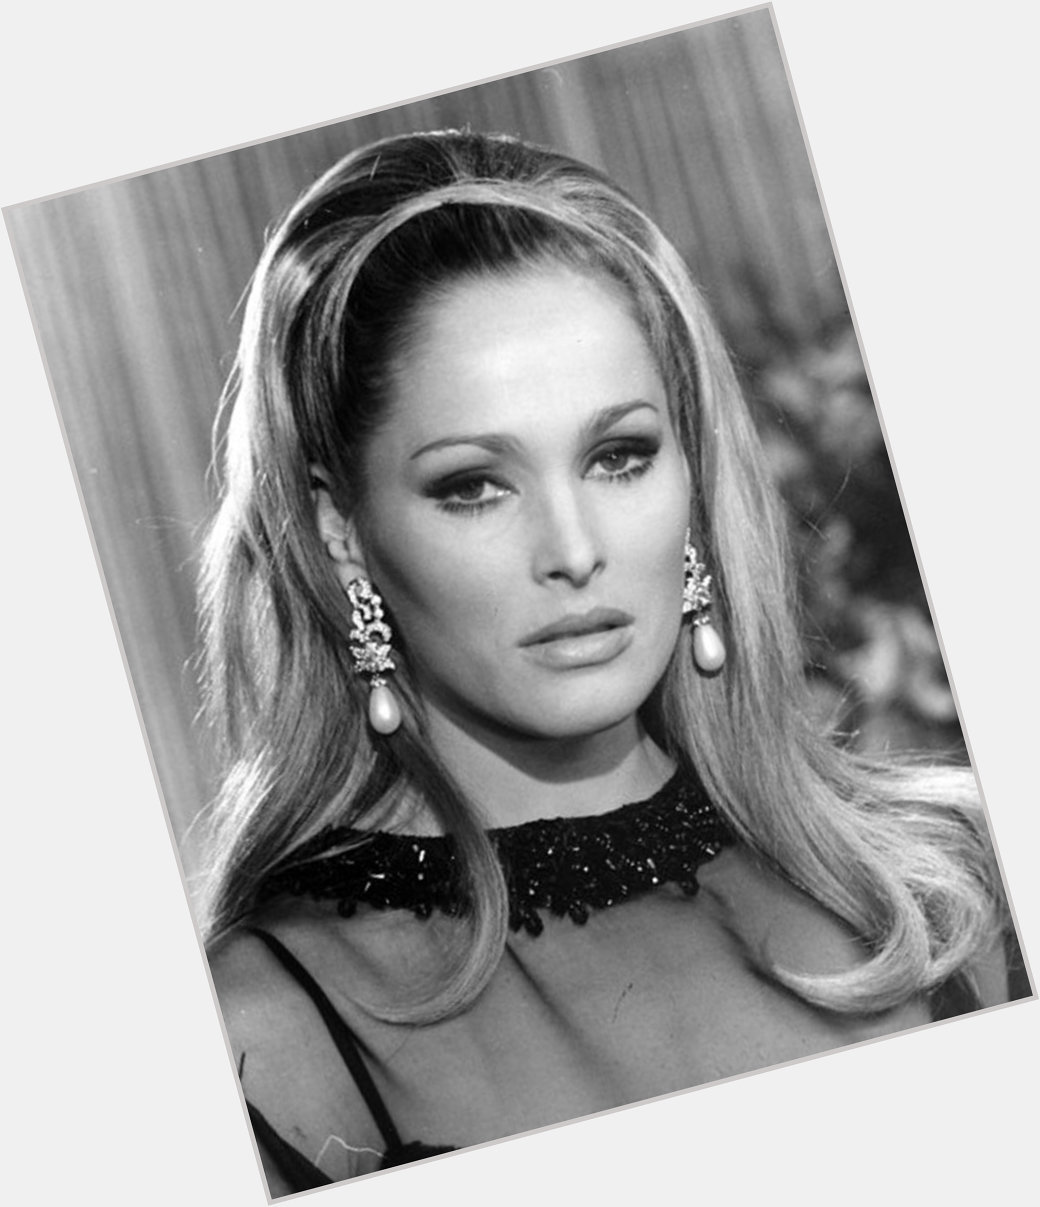 Happy Birthday to Ursula Andress who turns 84 today! 